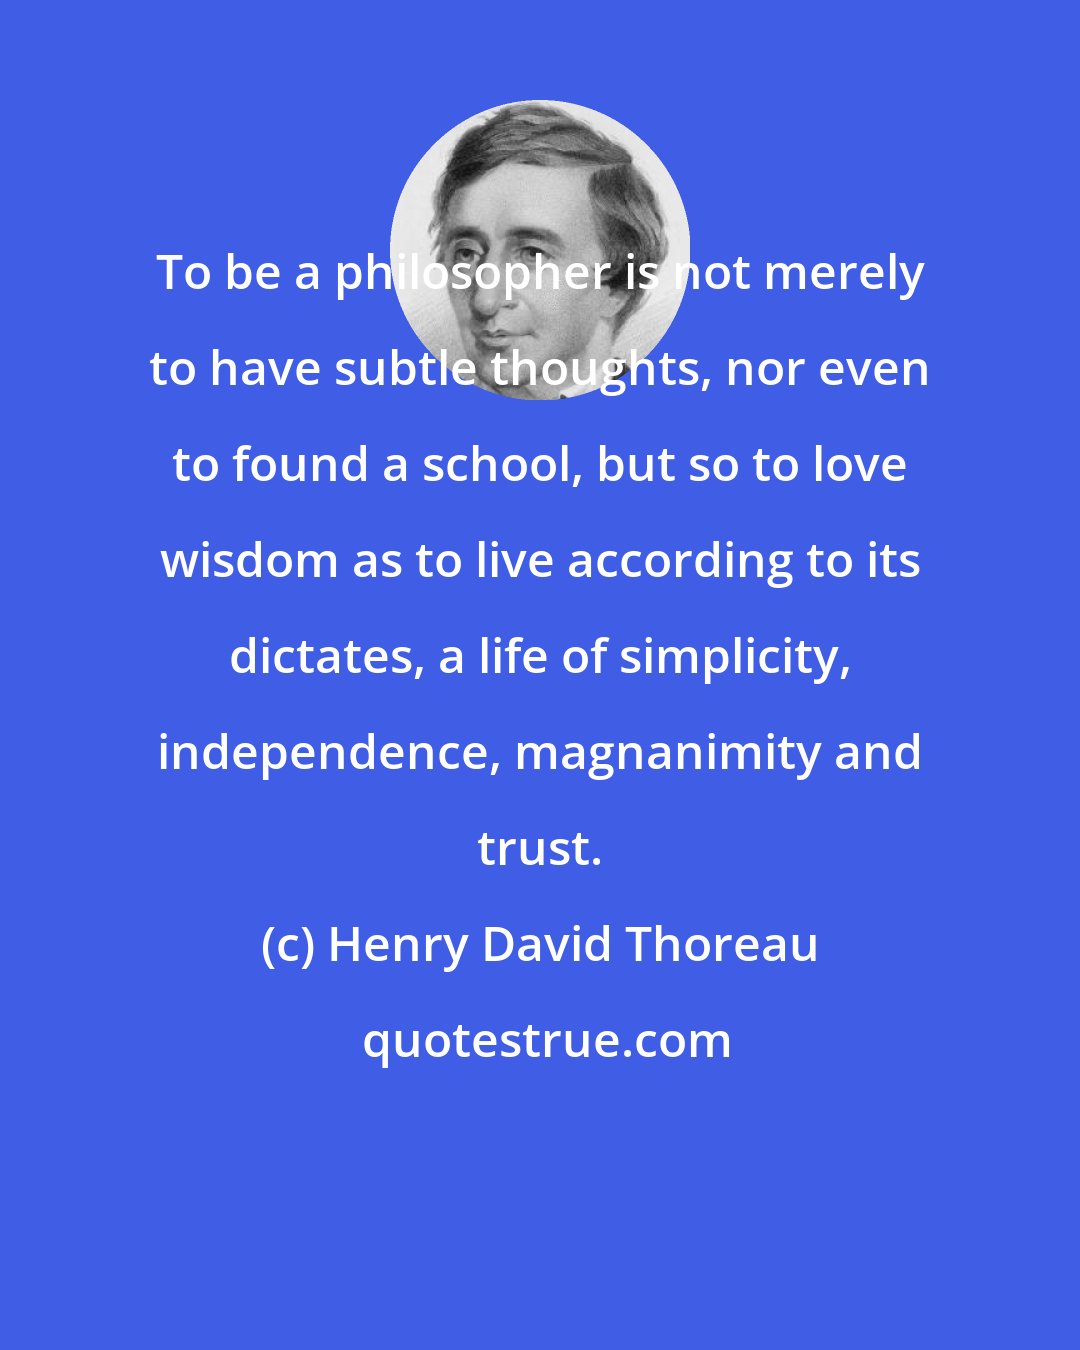 Henry David Thoreau: To be a philosopher is not merely to have subtle thoughts, nor even to found a school, but so to love wisdom as to live according to its dictates, a life of simplicity, independence, magnanimity and trust.